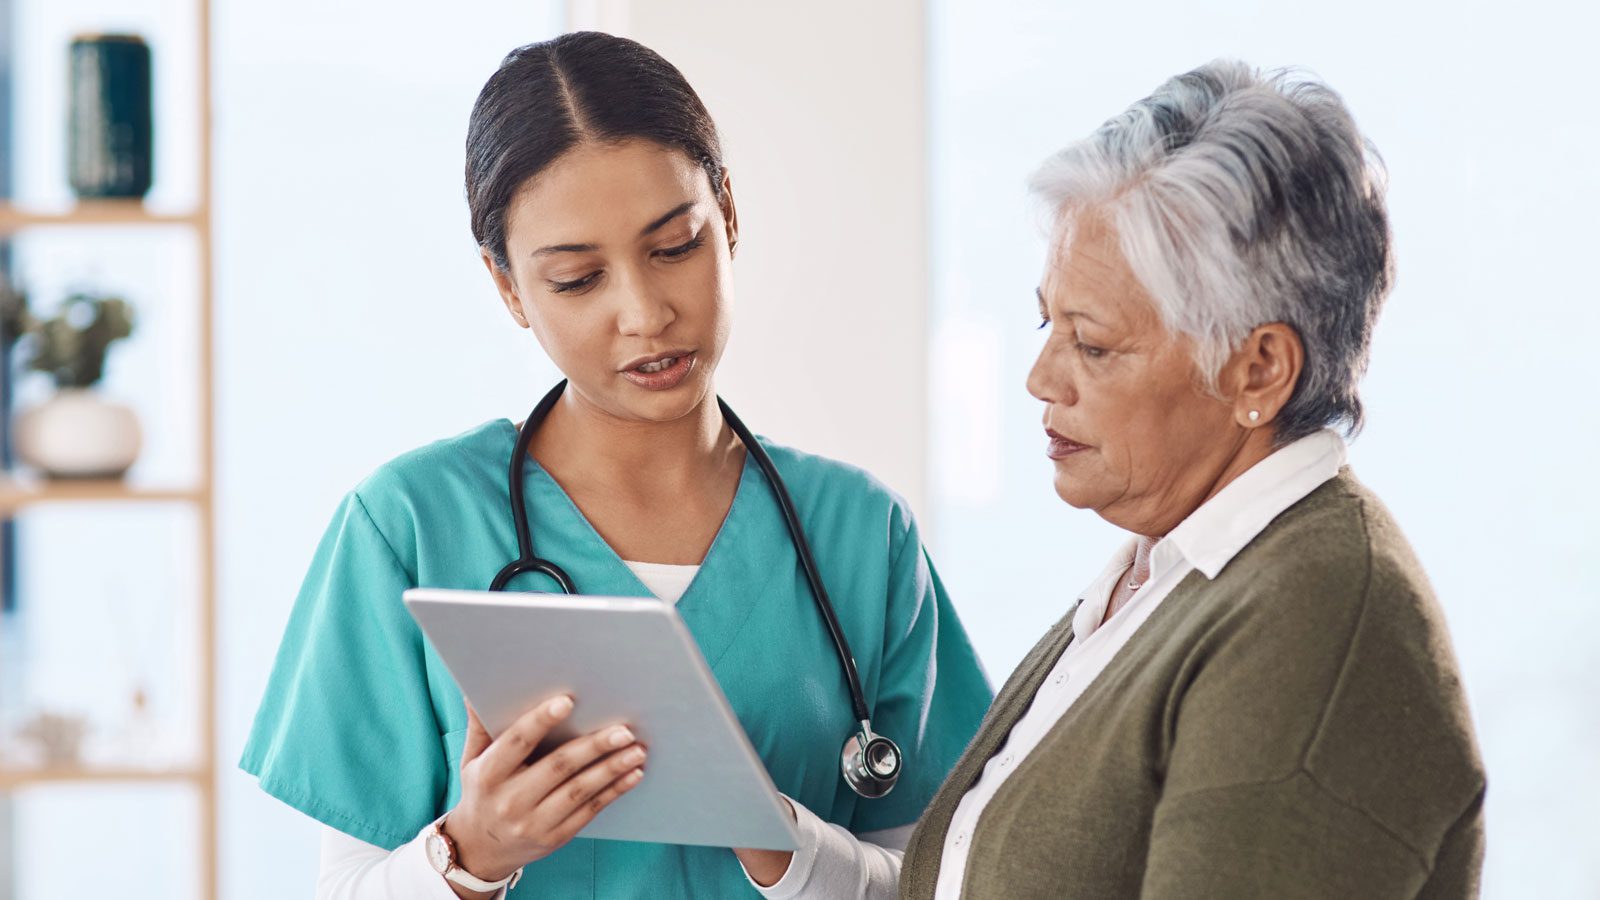 two healthcare professionals discuss results on a tablet